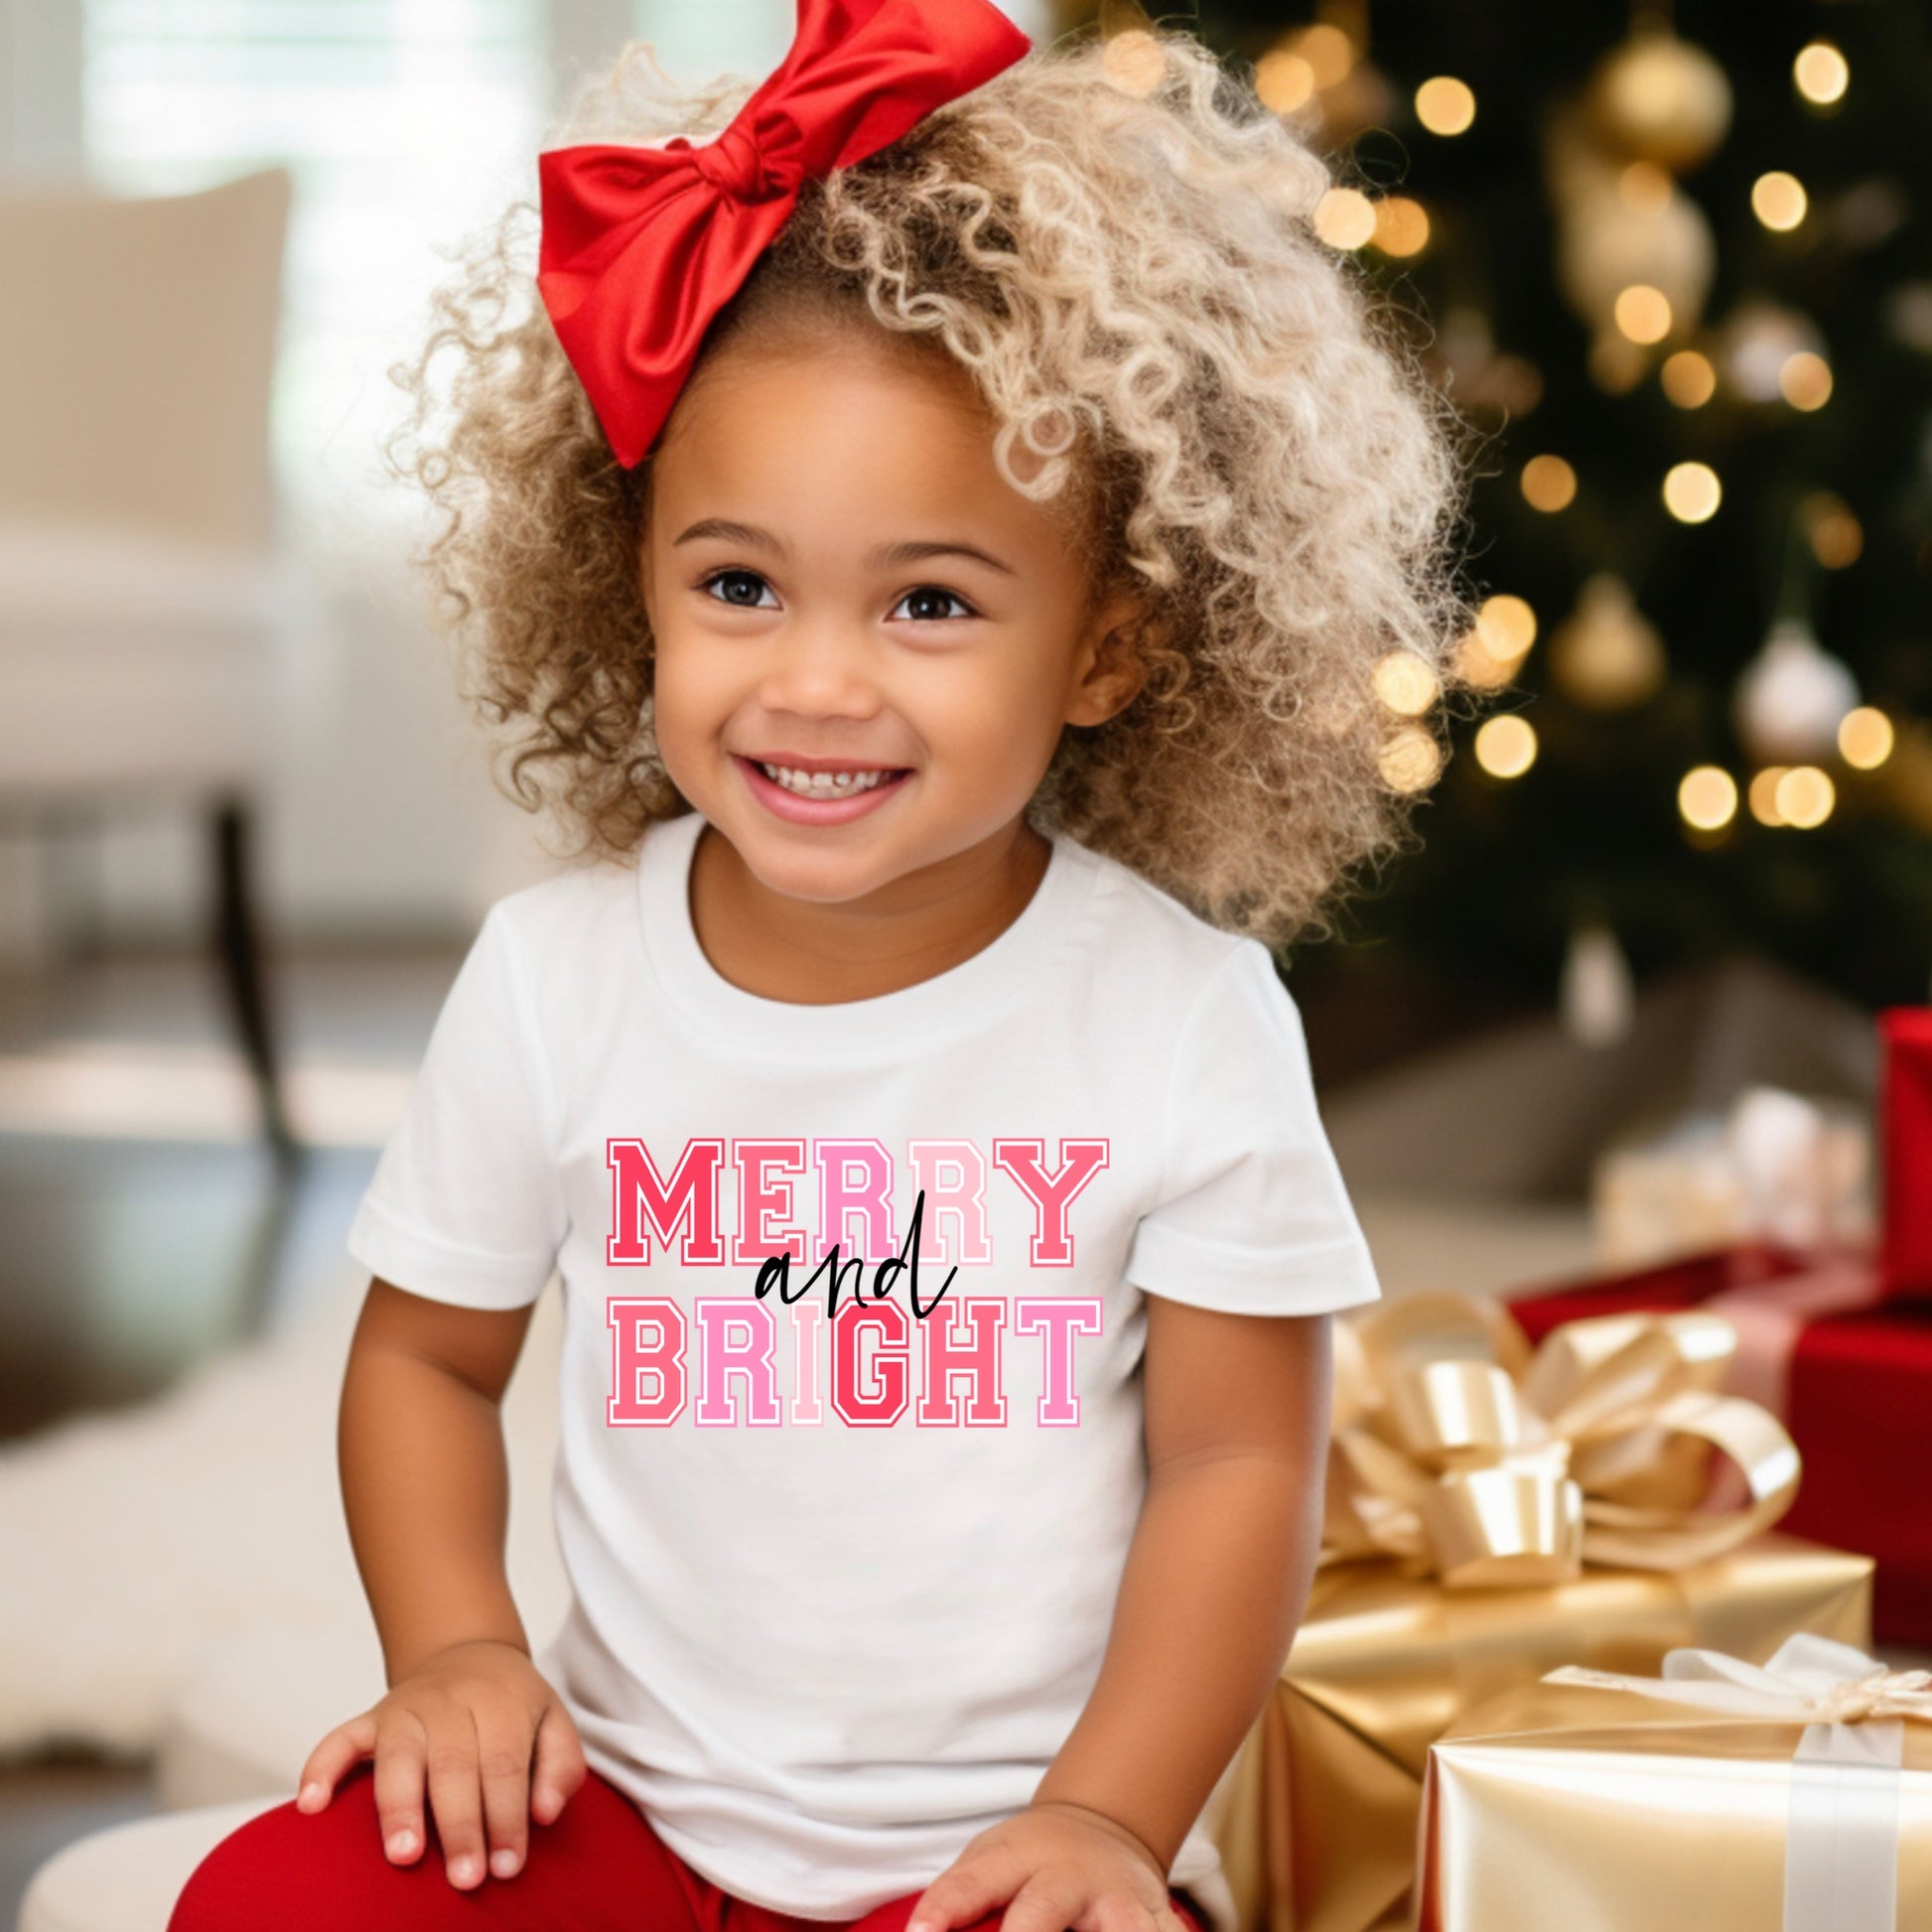 Preppy Pink "Merry and Bright" Christmas Iron On Heat Transfer